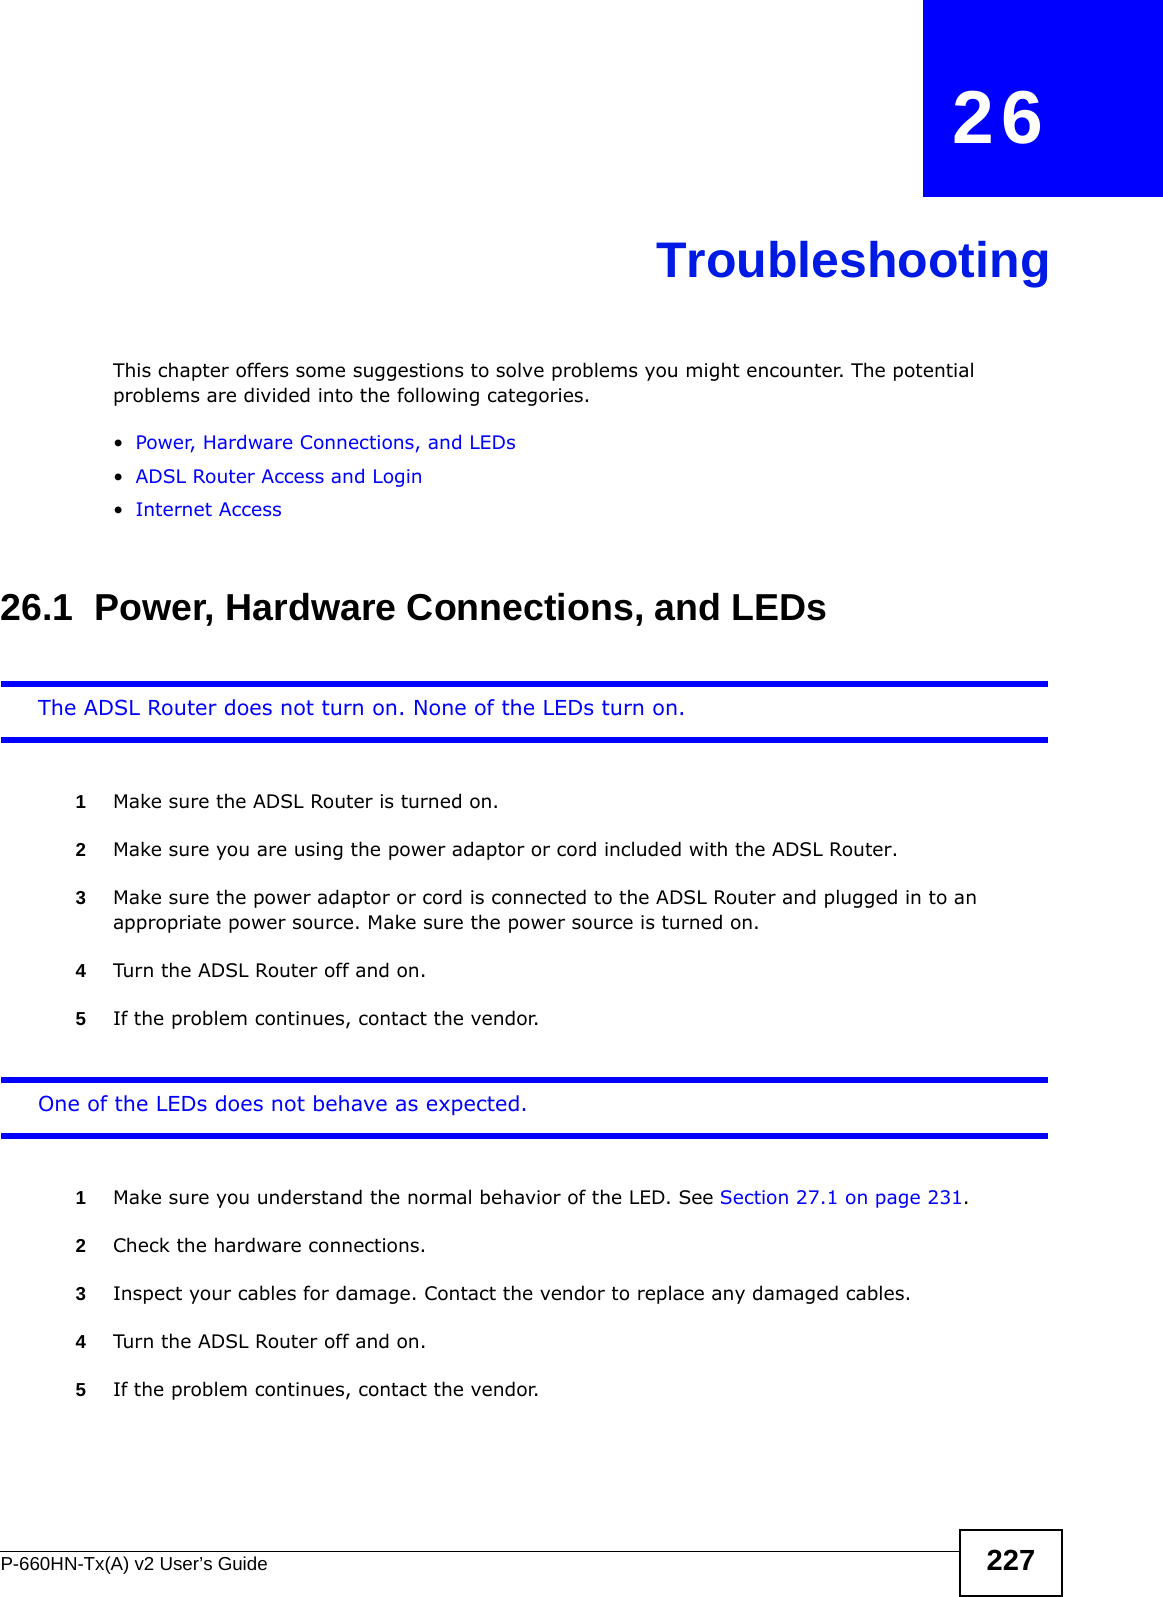 P-660HN-Tx(A) v2 User’s Guide 227CHAPTER   26TroubleshootingThis chapter offers some suggestions to solve problems you might encounter. The potential problems are divided into the following categories. •Power, Hardware Connections, and LEDs•ADSL Router Access and Login•Internet Access26.1  Power, Hardware Connections, and LEDsThe ADSL Router does not turn on. None of the LEDs turn on.1Make sure the ADSL Router is turned on. 2Make sure you are using the power adaptor or cord included with the ADSL Router.3Make sure the power adaptor or cord is connected to the ADSL Router and plugged in to an appropriate power source. Make sure the power source is turned on.4Turn the ADSL Router off and on.5If the problem continues, contact the vendor.One of the LEDs does not behave as expected.1Make sure you understand the normal behavior of the LED. See Section 27.1 on page 231.2Check the hardware connections.3Inspect your cables for damage. Contact the vendor to replace any damaged cables.4Turn the ADSL Router off and on.5If the problem continues, contact the vendor.